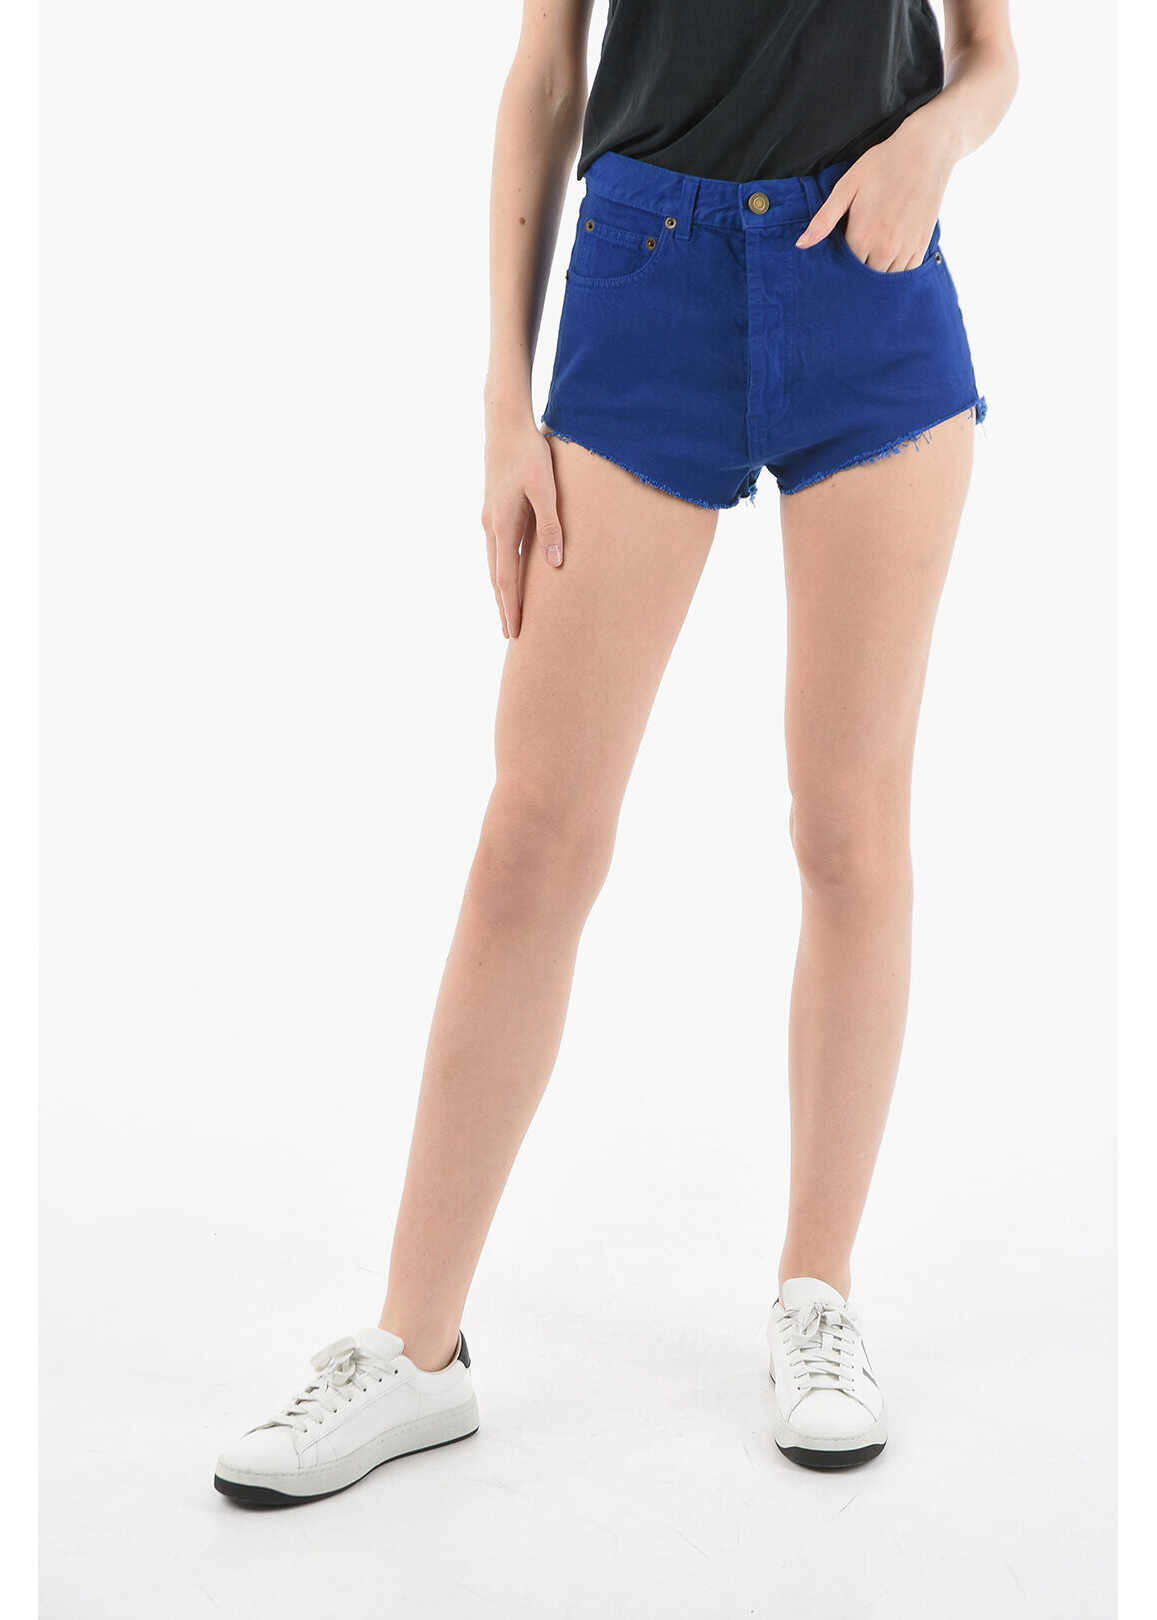 Saint Laurent Fringed High-Waisted Shorts With Buttoned Fastening Blue